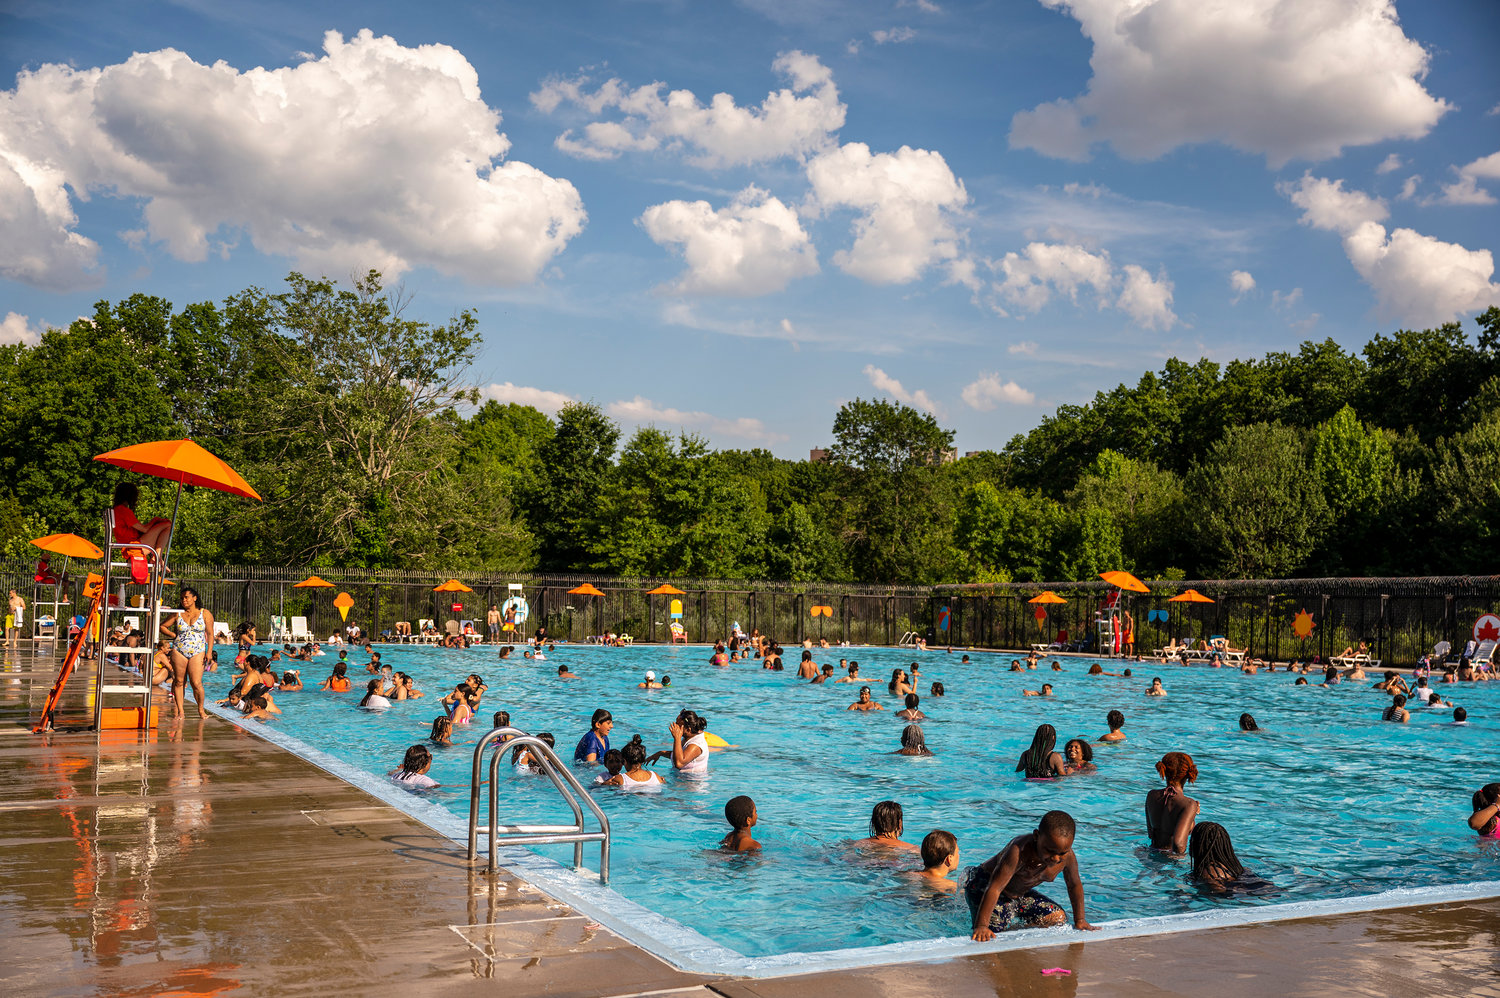 Van Cortlandt Park outdoor community pool is open for swimming. However, their programs are not. All swim programs, including lap, senior, and learn to swim, have been canceled for the summer because of the national lifeguard shortage. The parks department also altered pool hours.